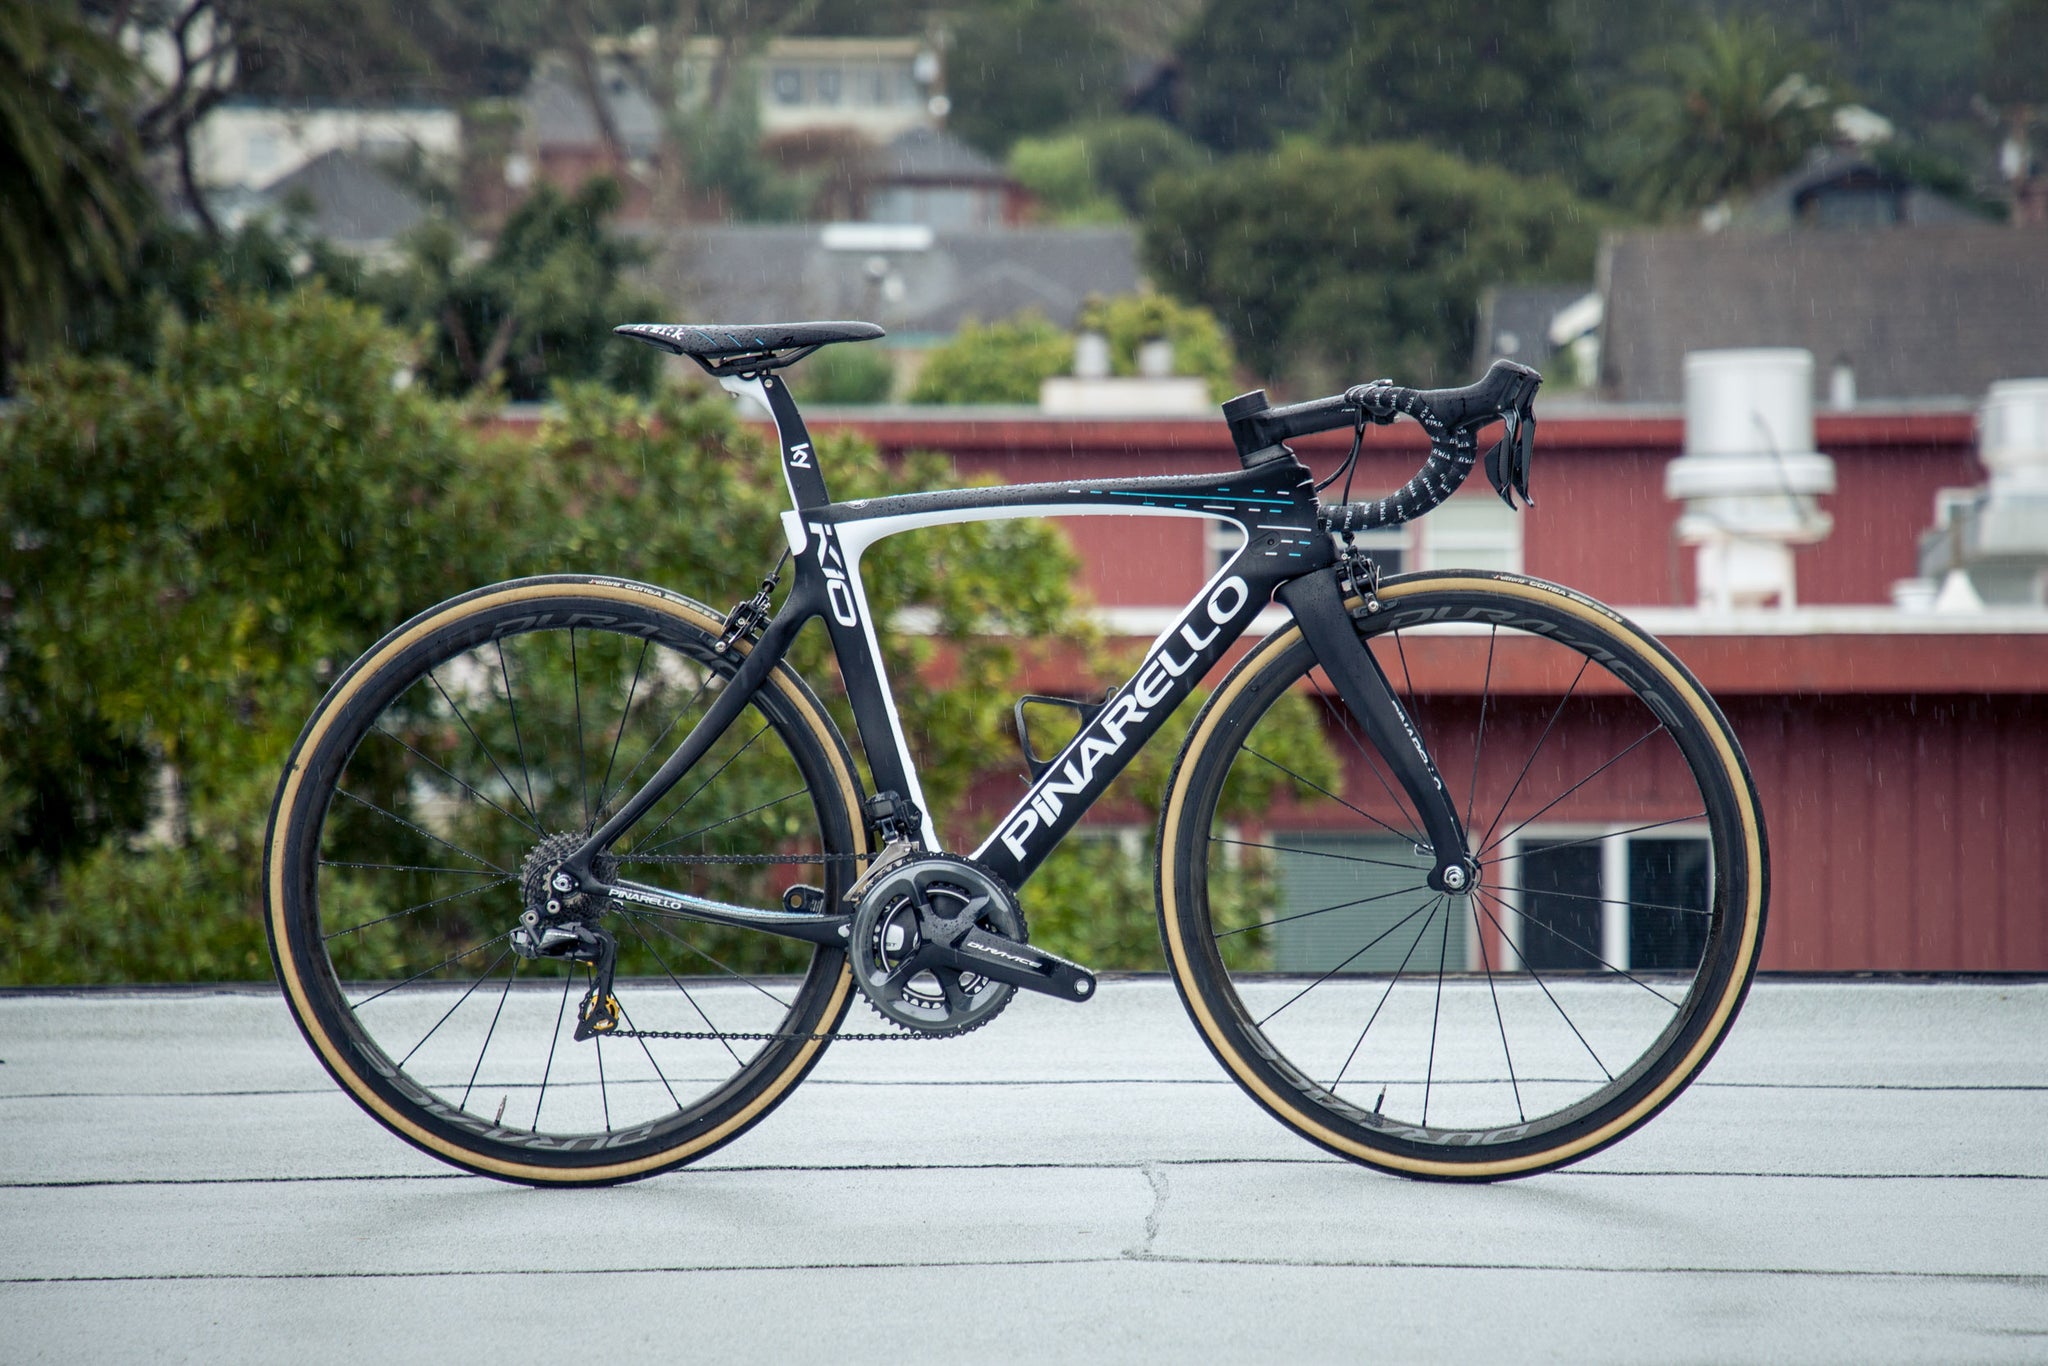 The Pinarello Dogma Shootout - F10, F10- Disc, and K10 – Above Category